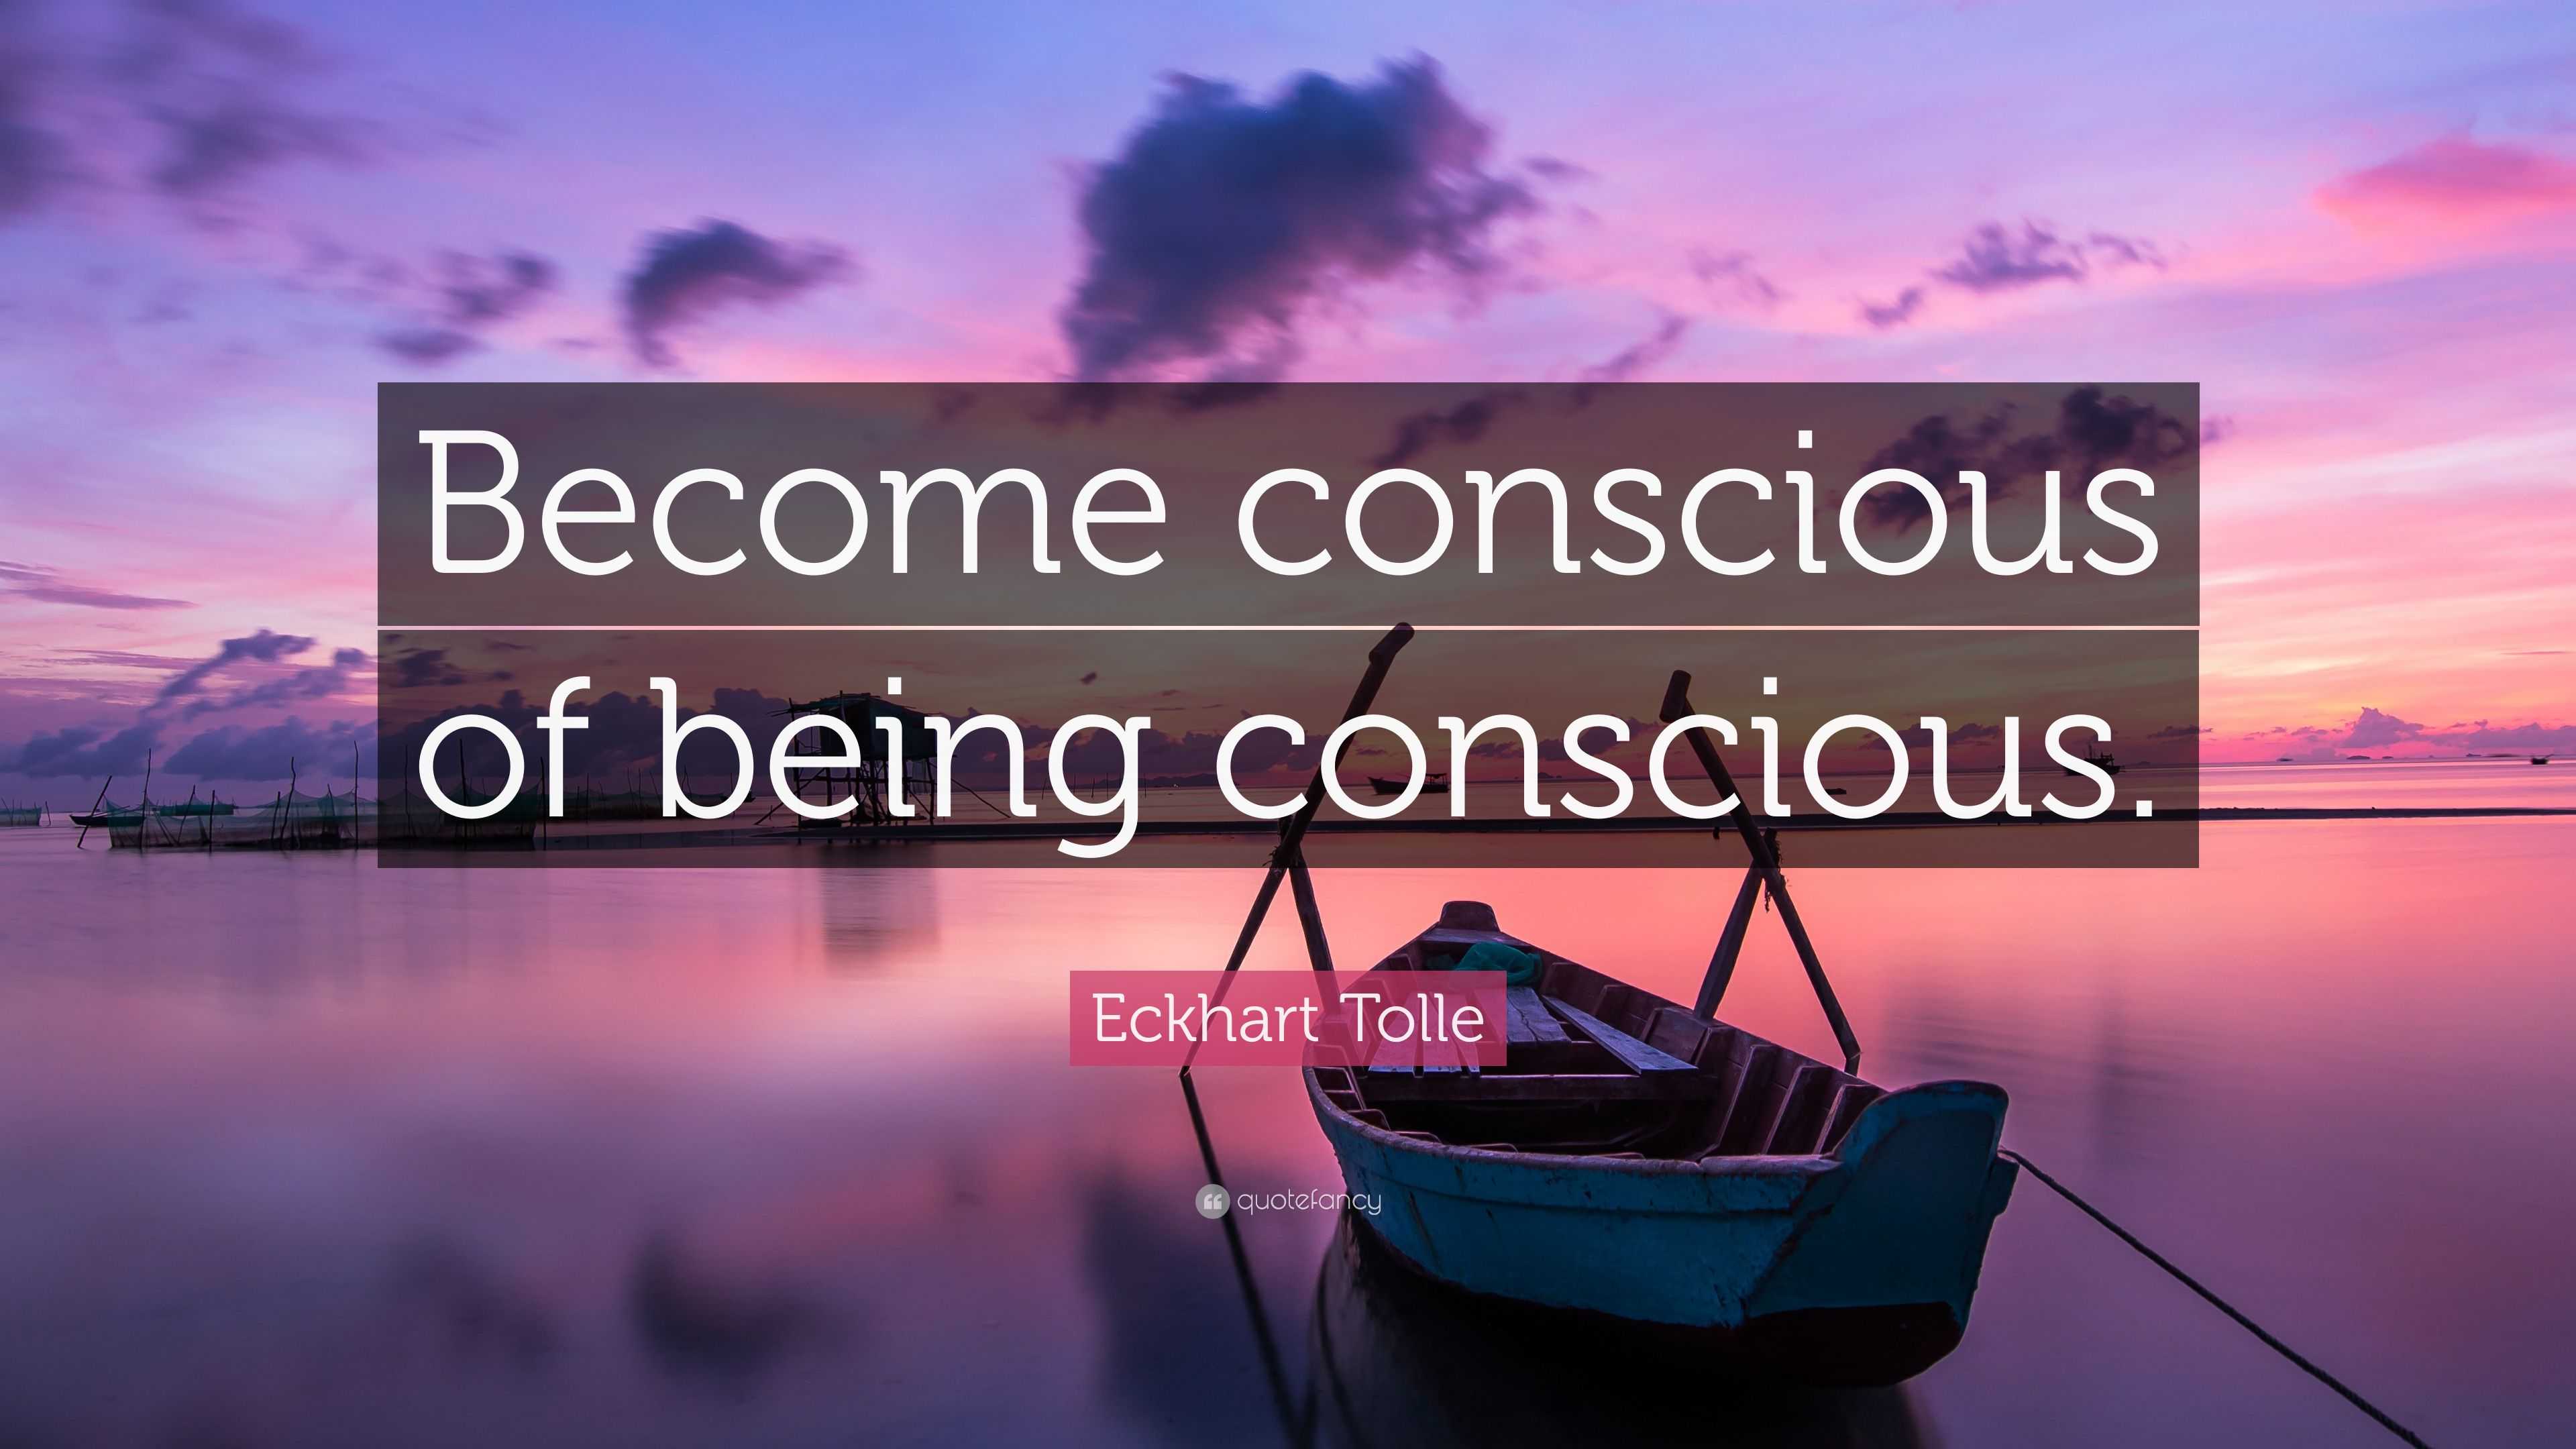 2008003 Eckhart Tolle Quote Become conscious of being conscious